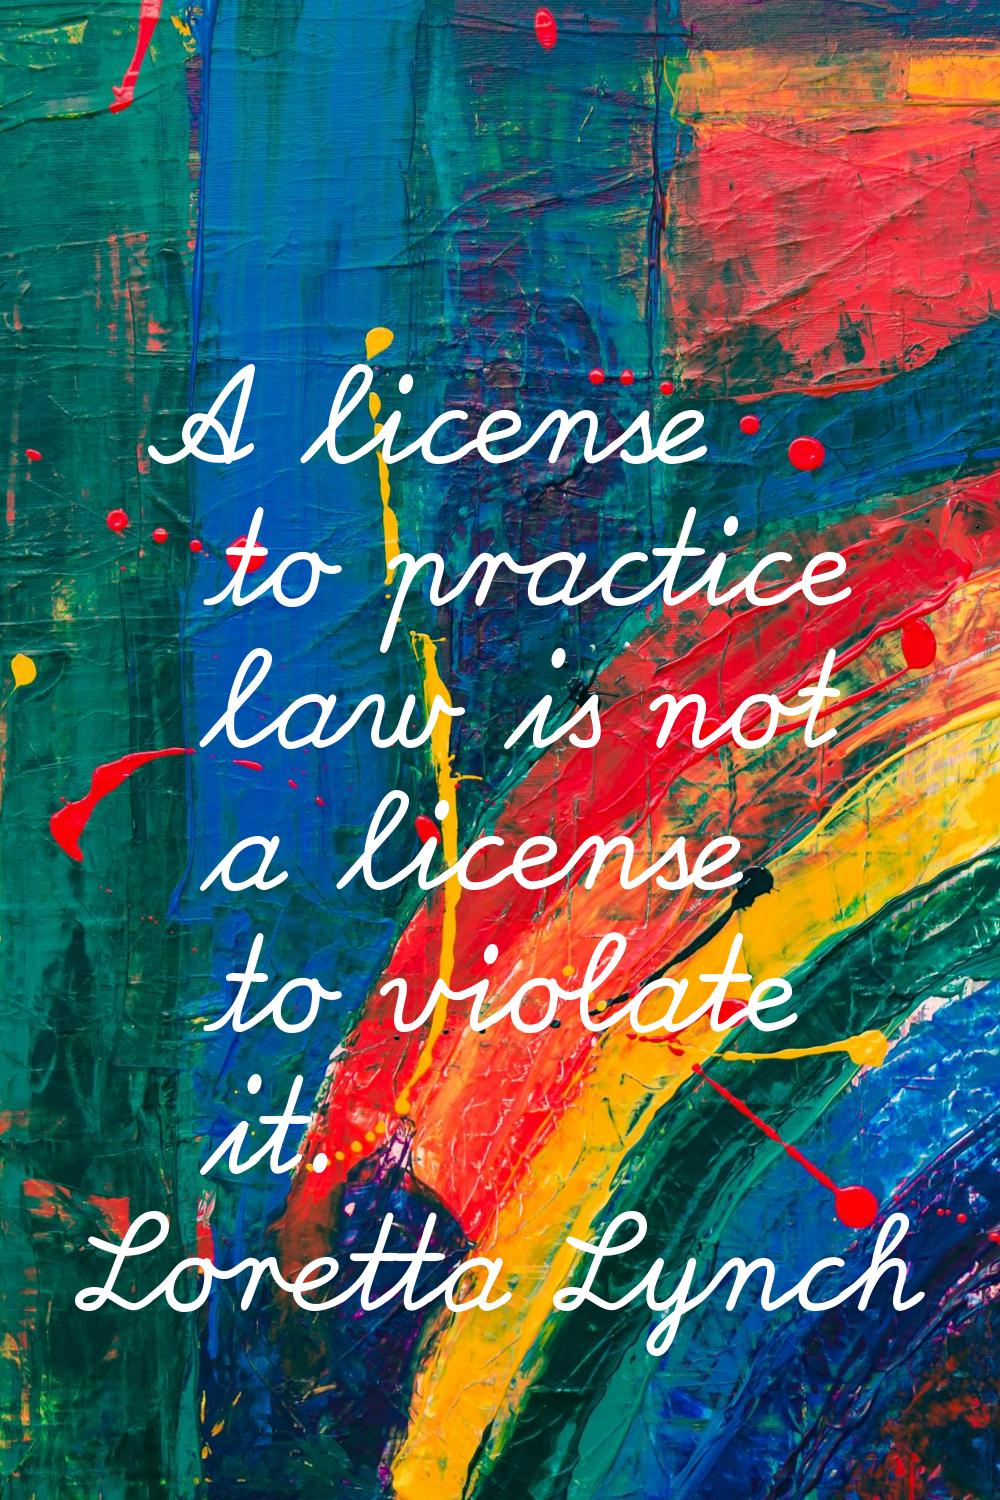 A license to practice law is not a license to violate it.